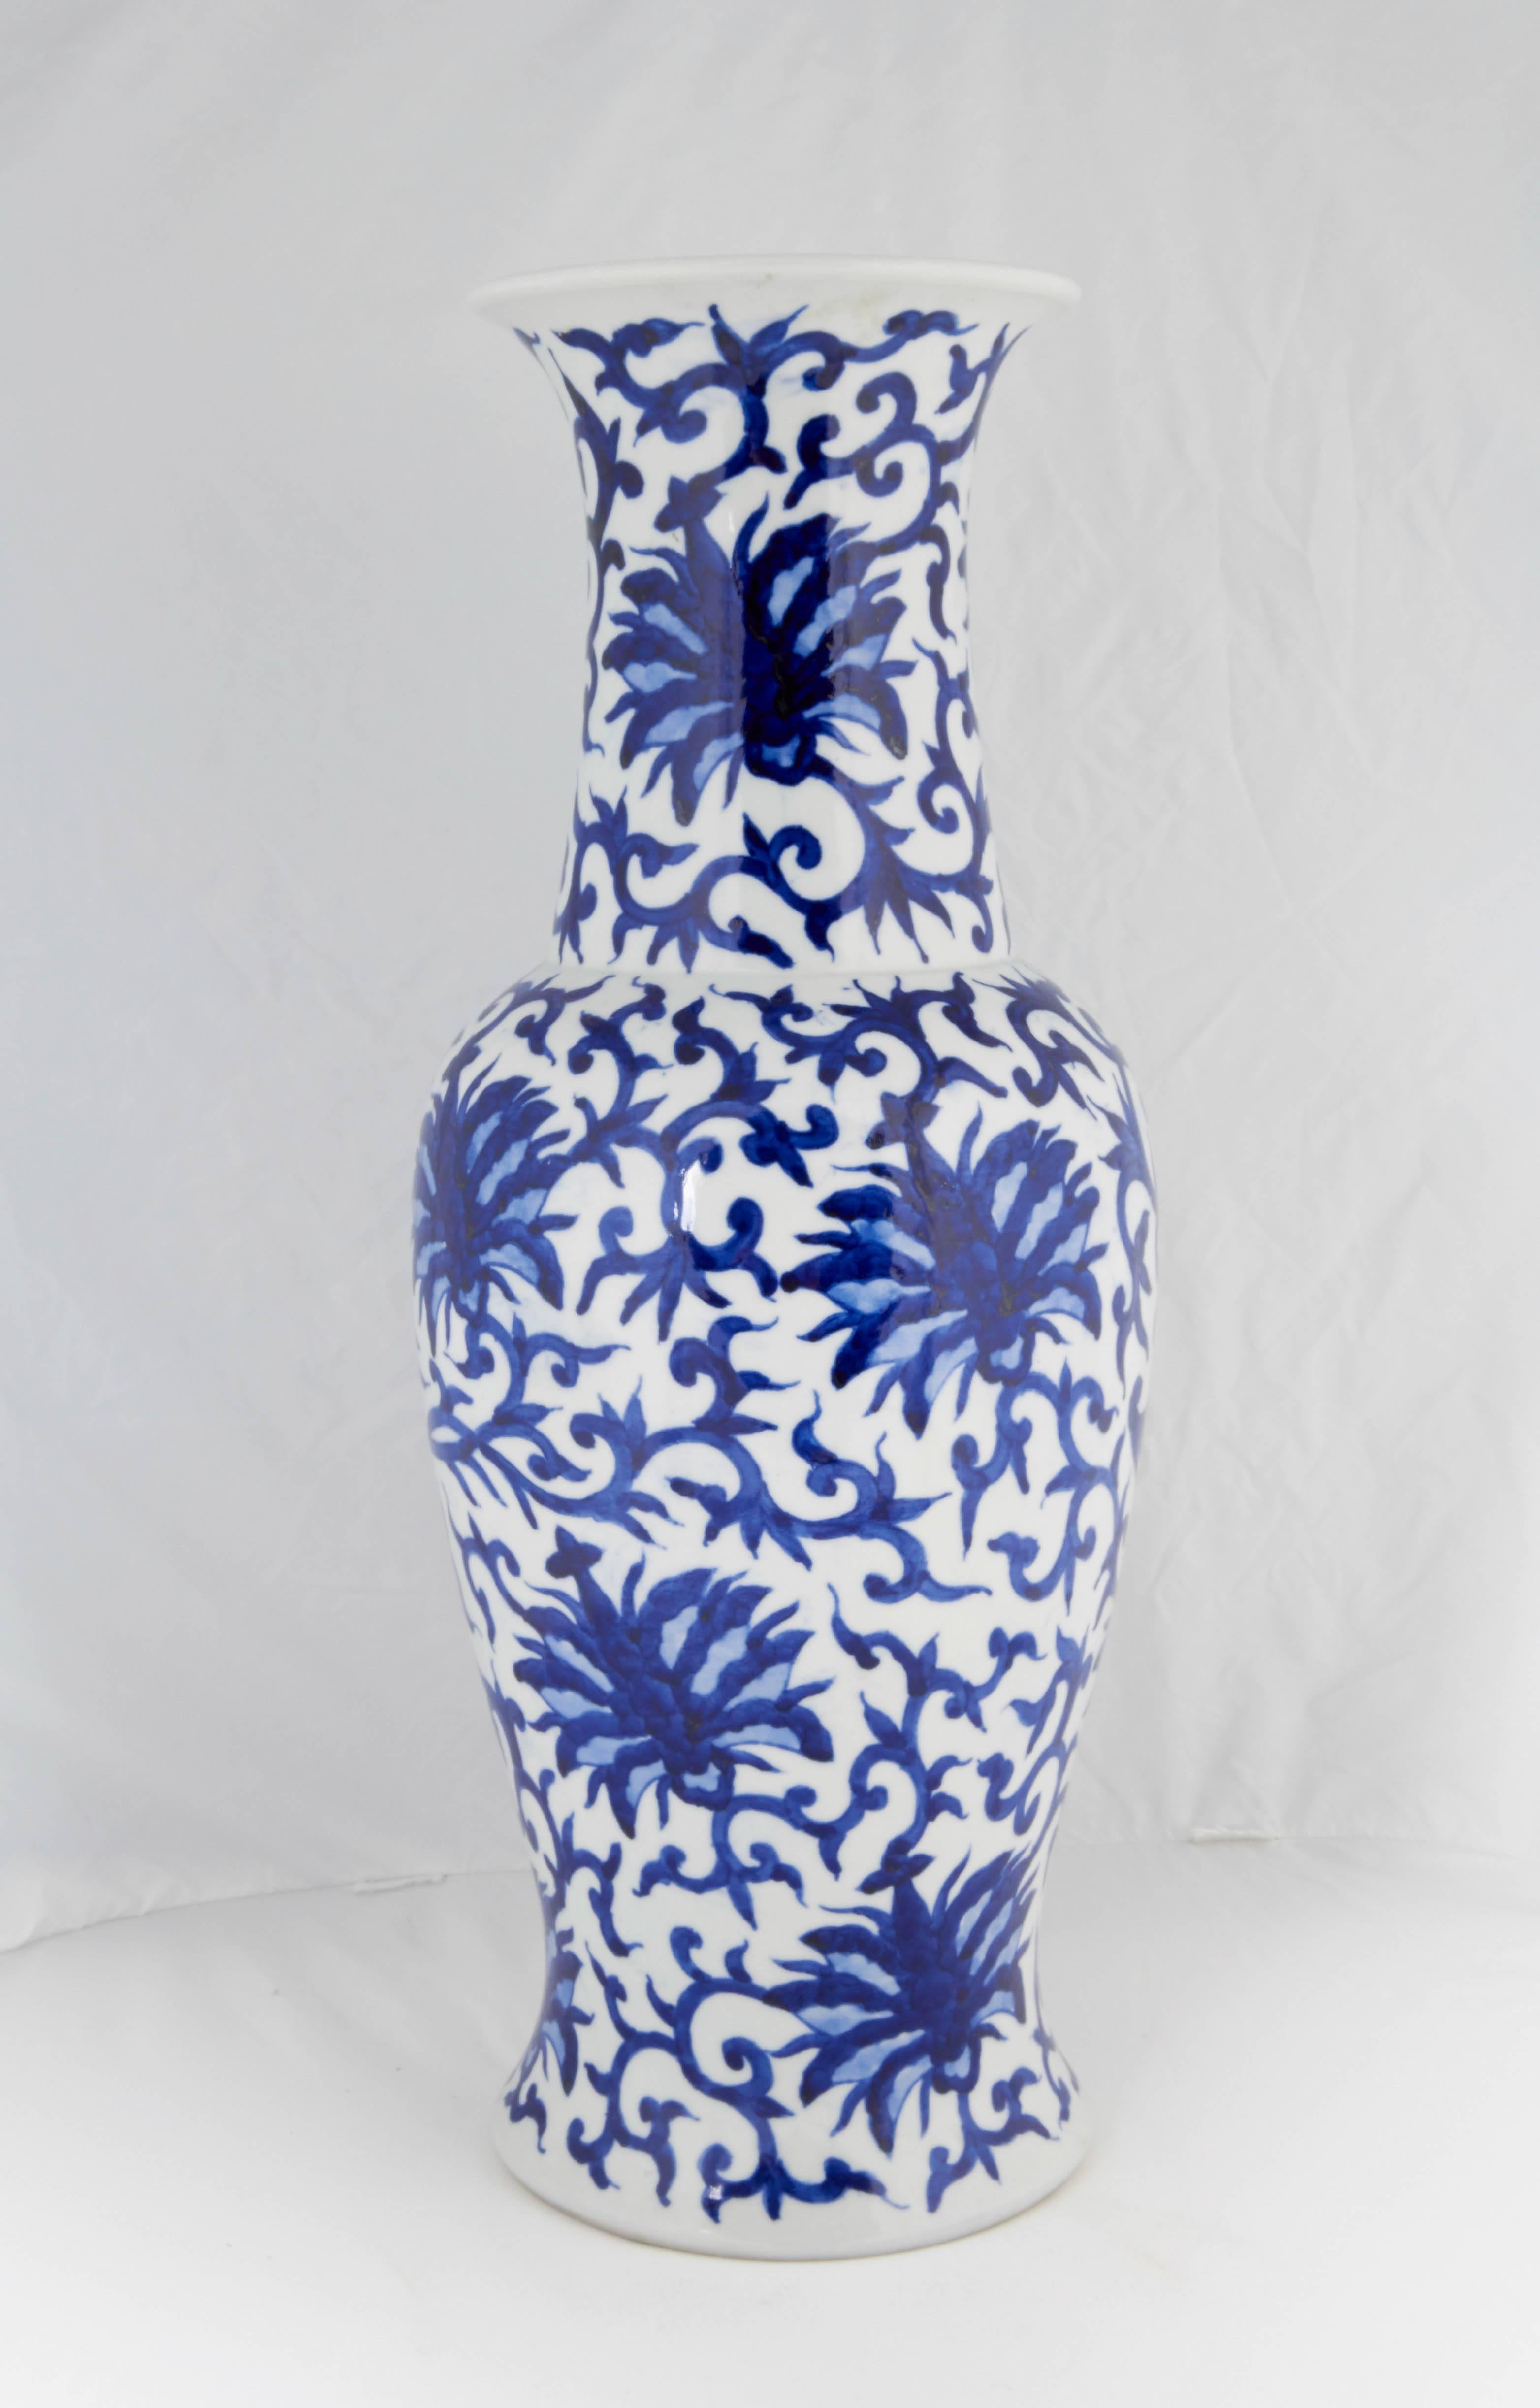 Glazed Pair of Chinese White and Blue Ceramic Vases with Floral Motifs